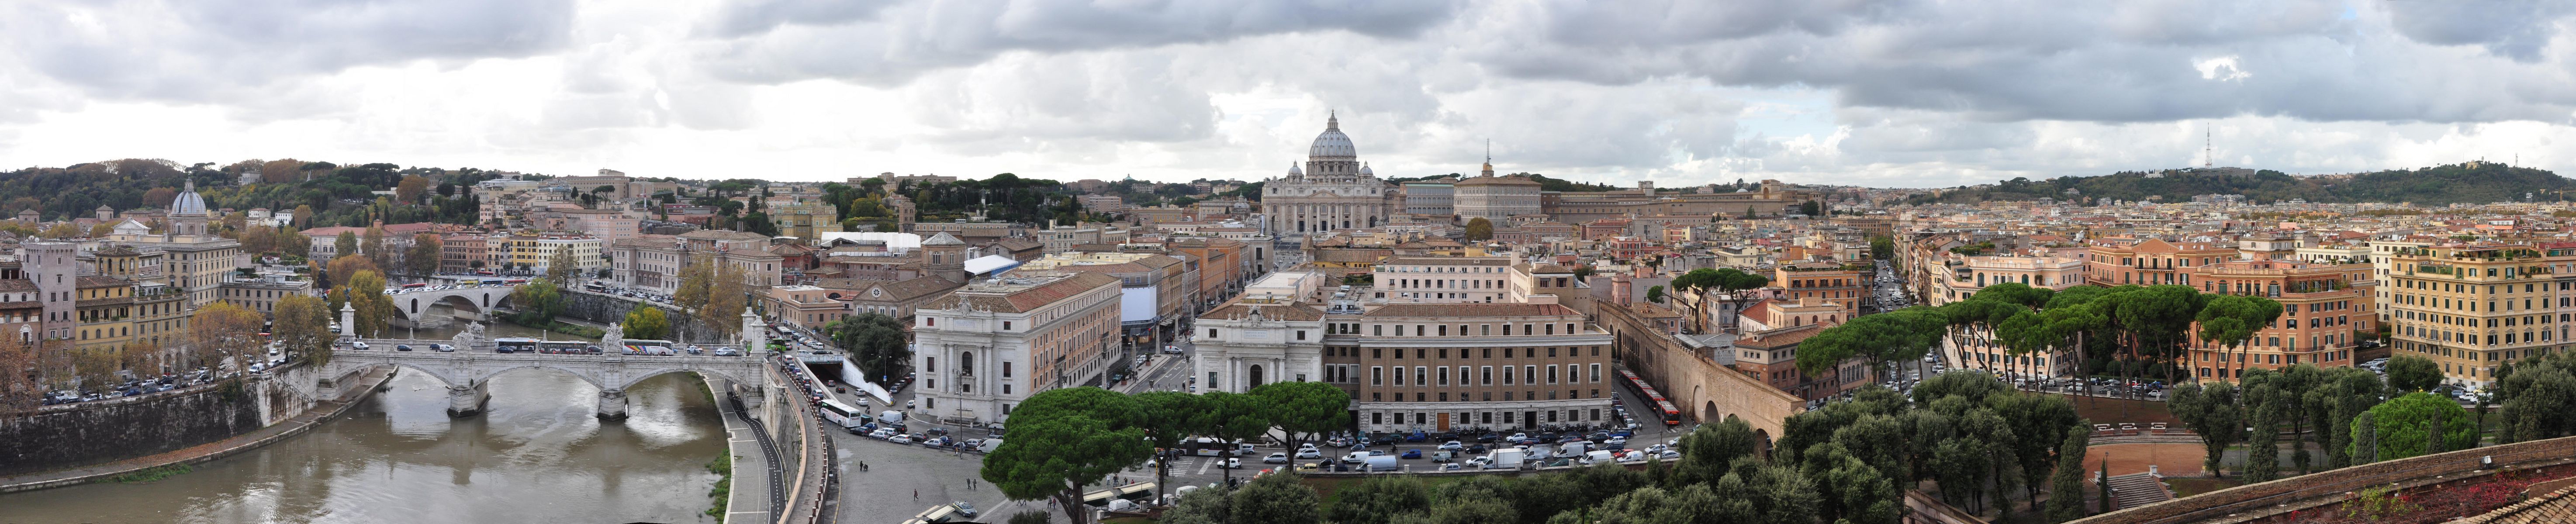 The Tiber and the Vatican - Rome - Italy.jpg